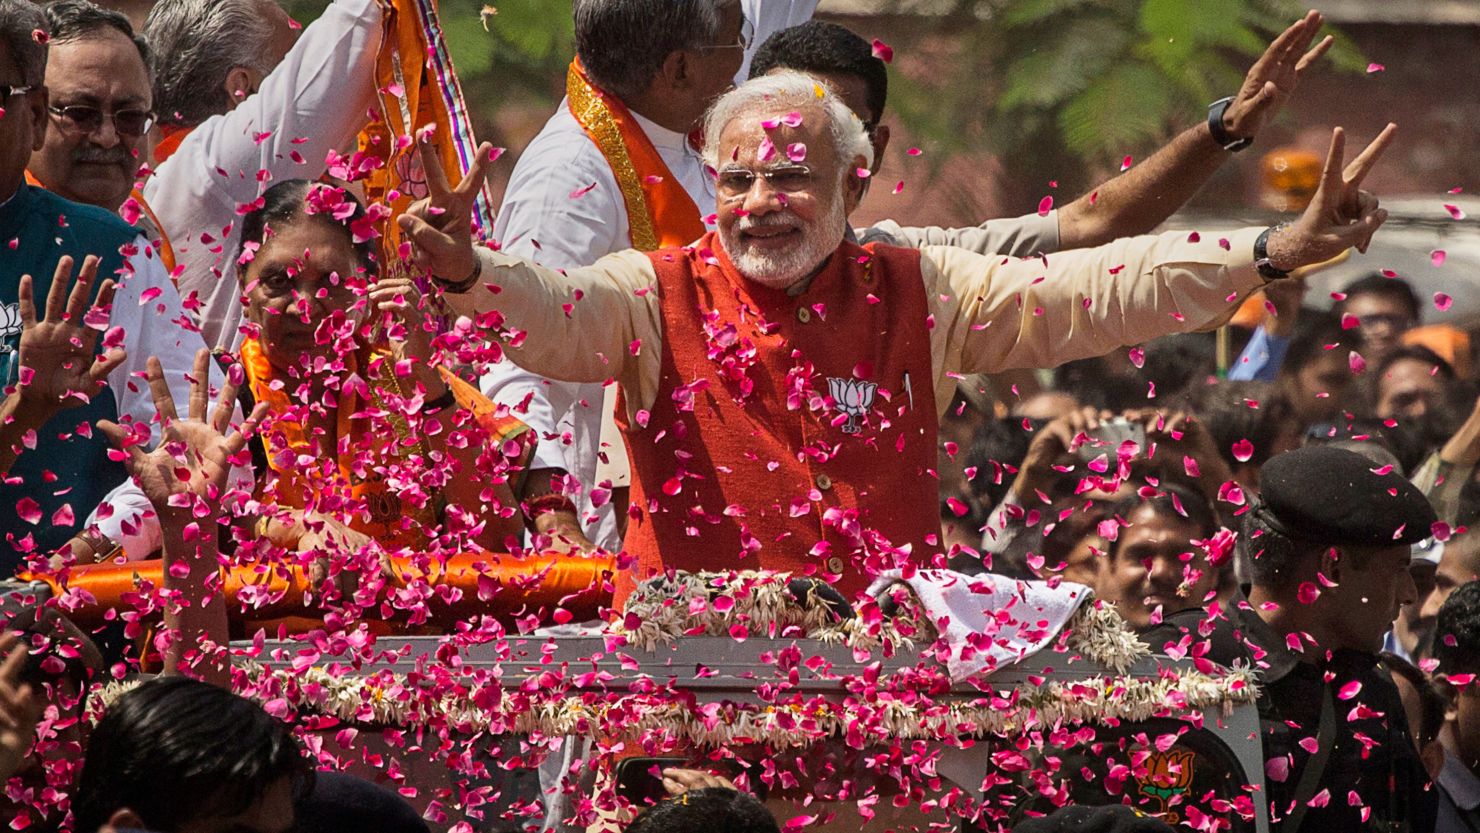 Narendra Modi is covered in flower petals while campaigning in Vadodra, India this week.  